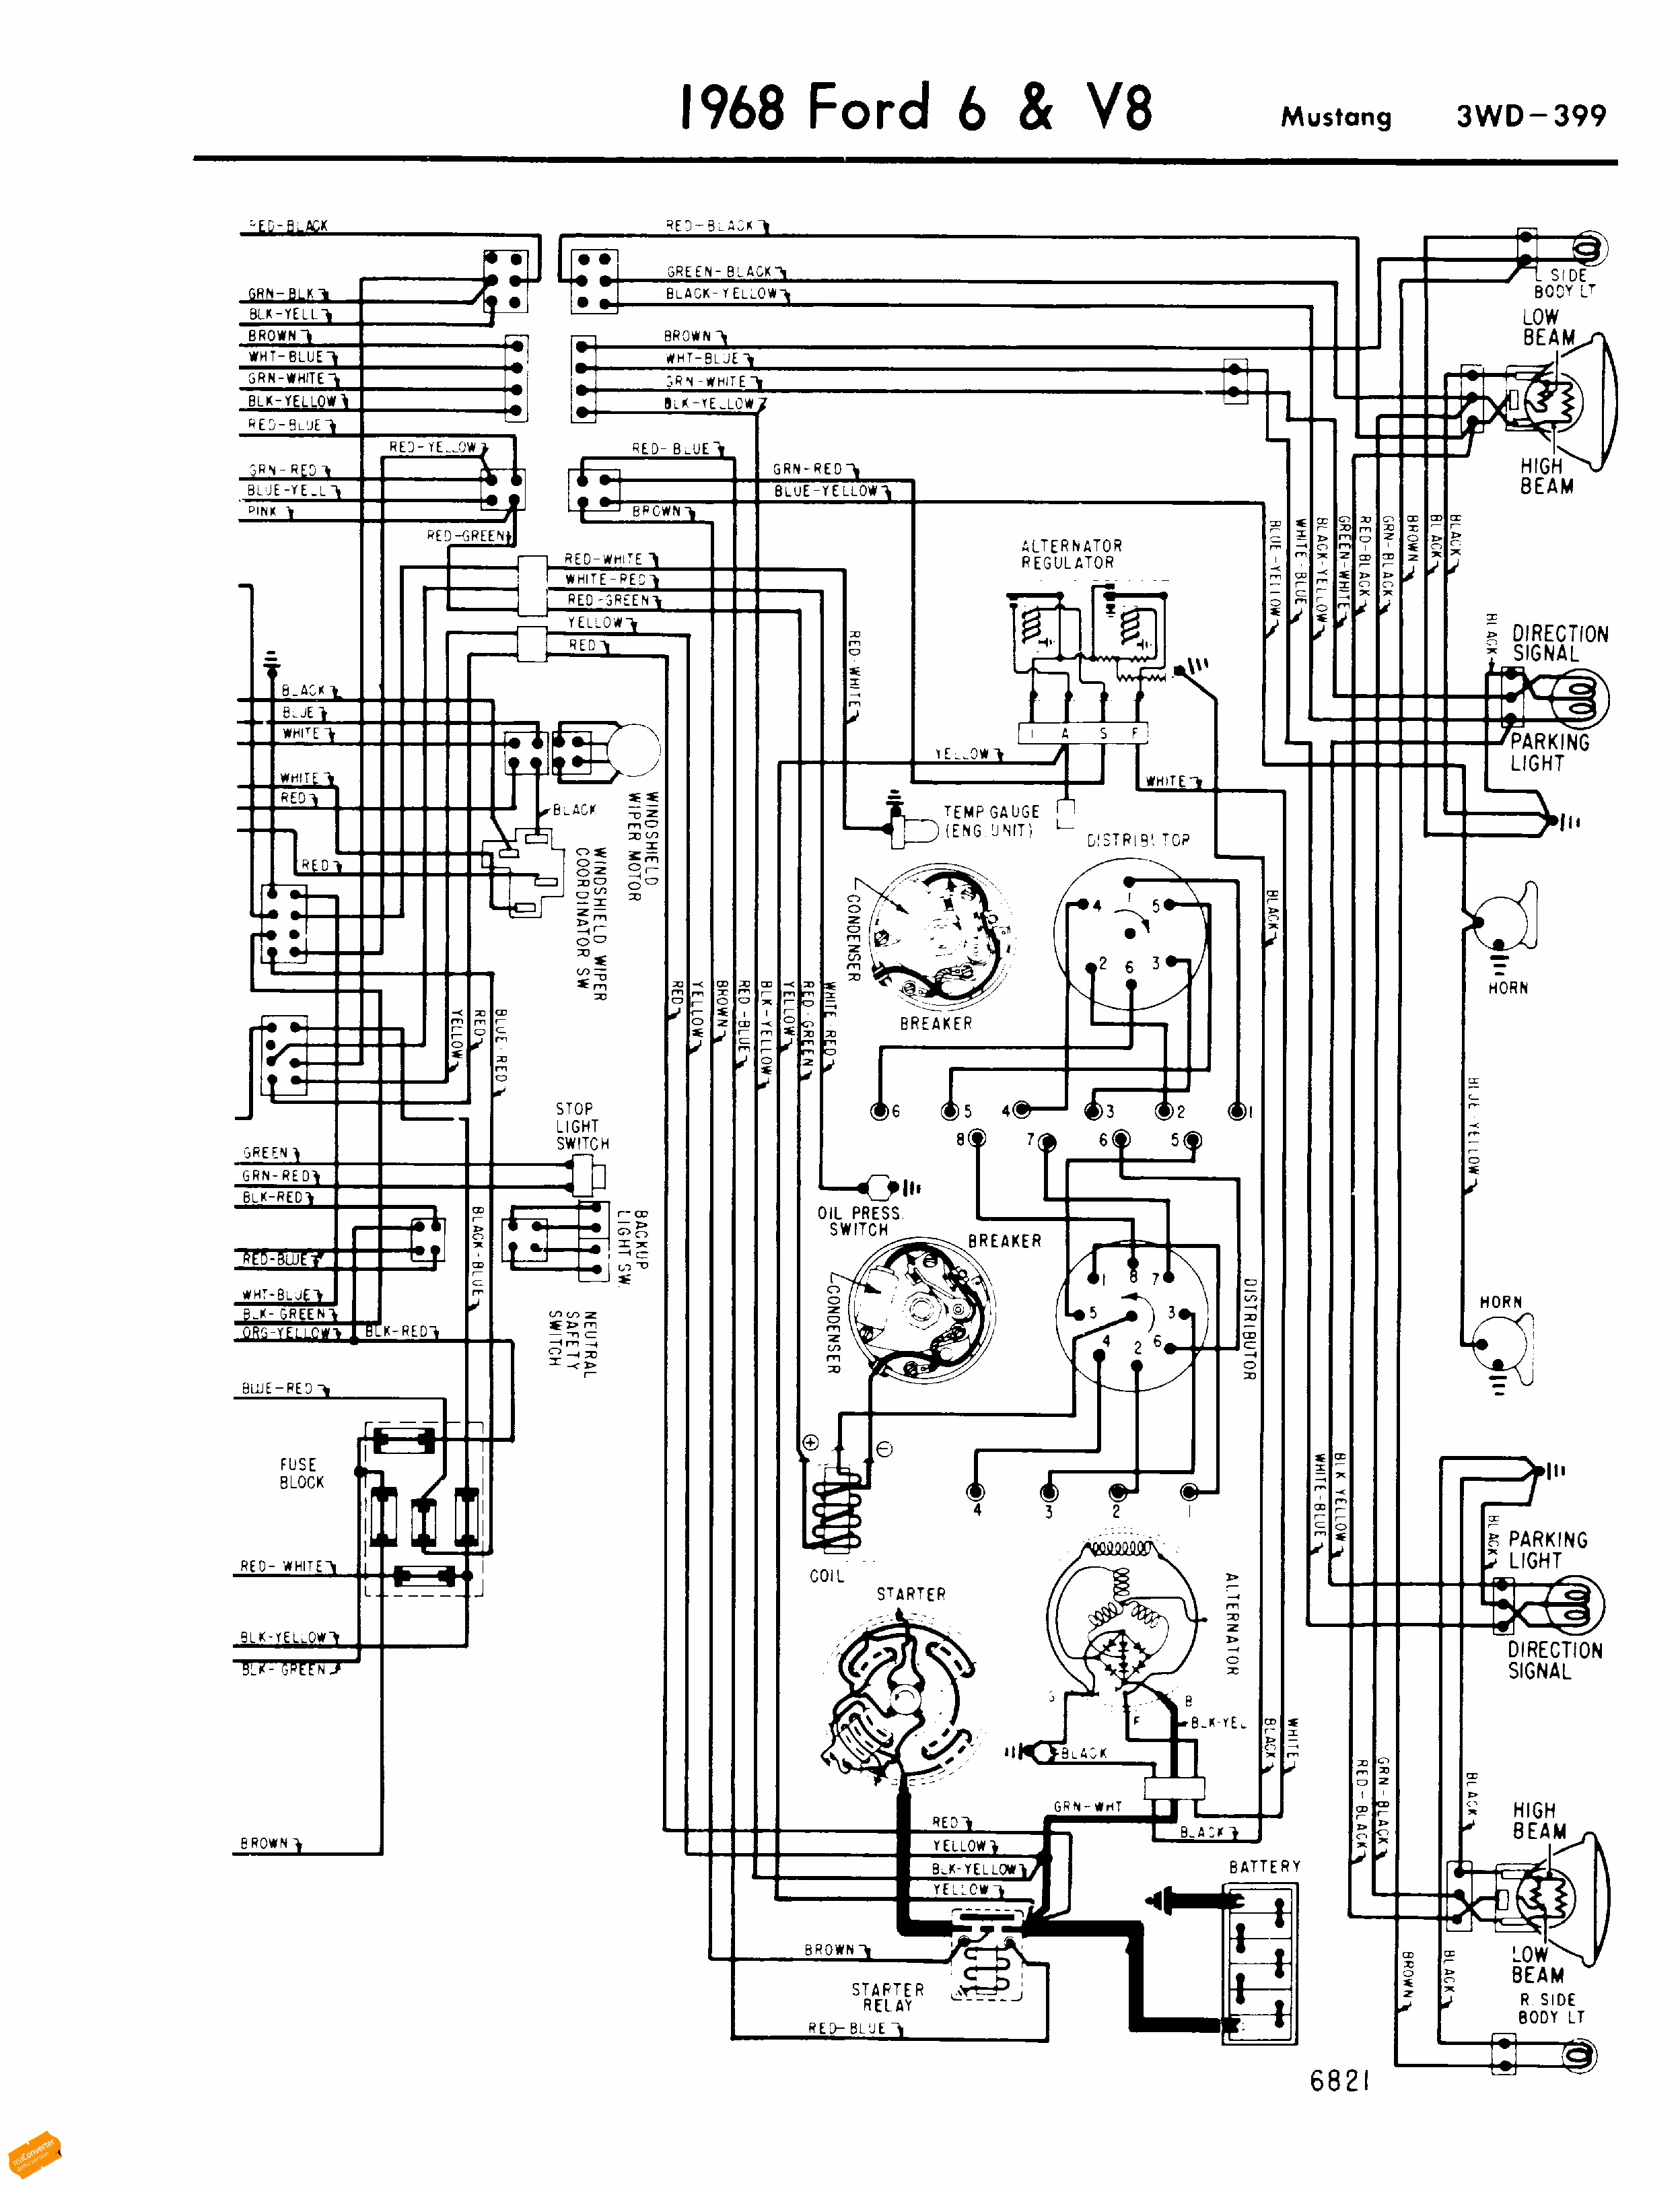 Ford Ka Engine Diagram Wiring Diagram Best Sample 1968 Mustang Schematic Endear ford Of Ford Ka Engine Diagram